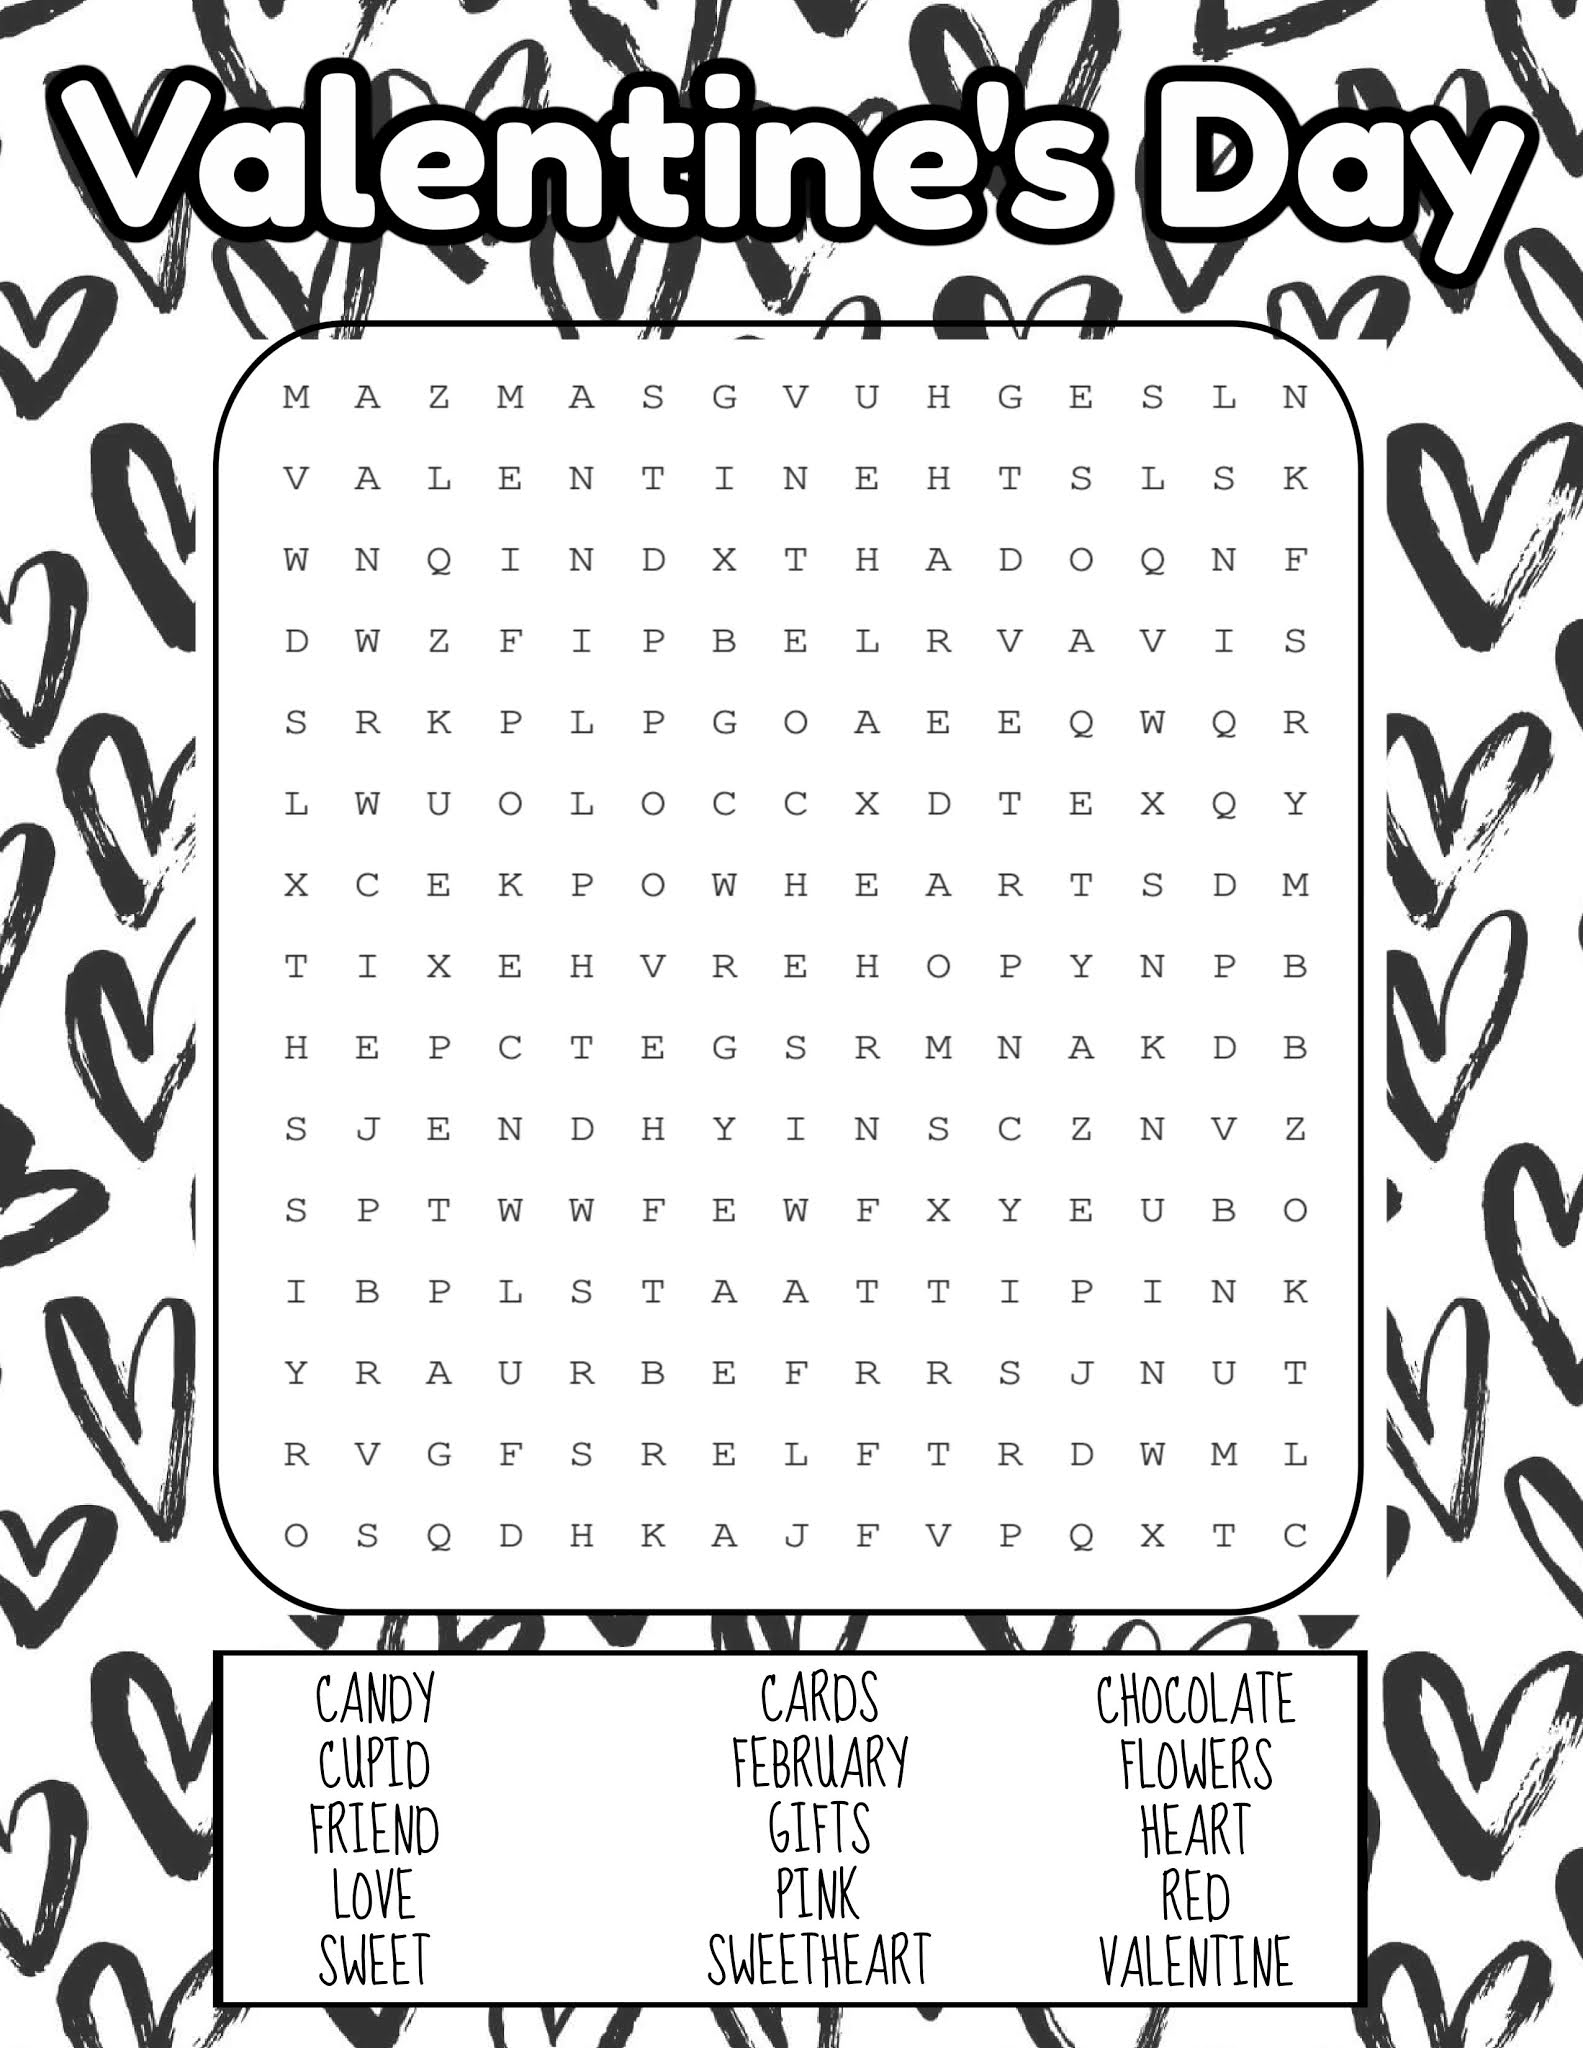 Valentines day coloring pages pdf. Happy Valentine’s day coloring pages. Valentines day coloring pages. Valentines coloring pages. Coloring pages valentines day. Valentines day coloring sheets. #valentines #February #holiday #coloring #kids #family #preschool